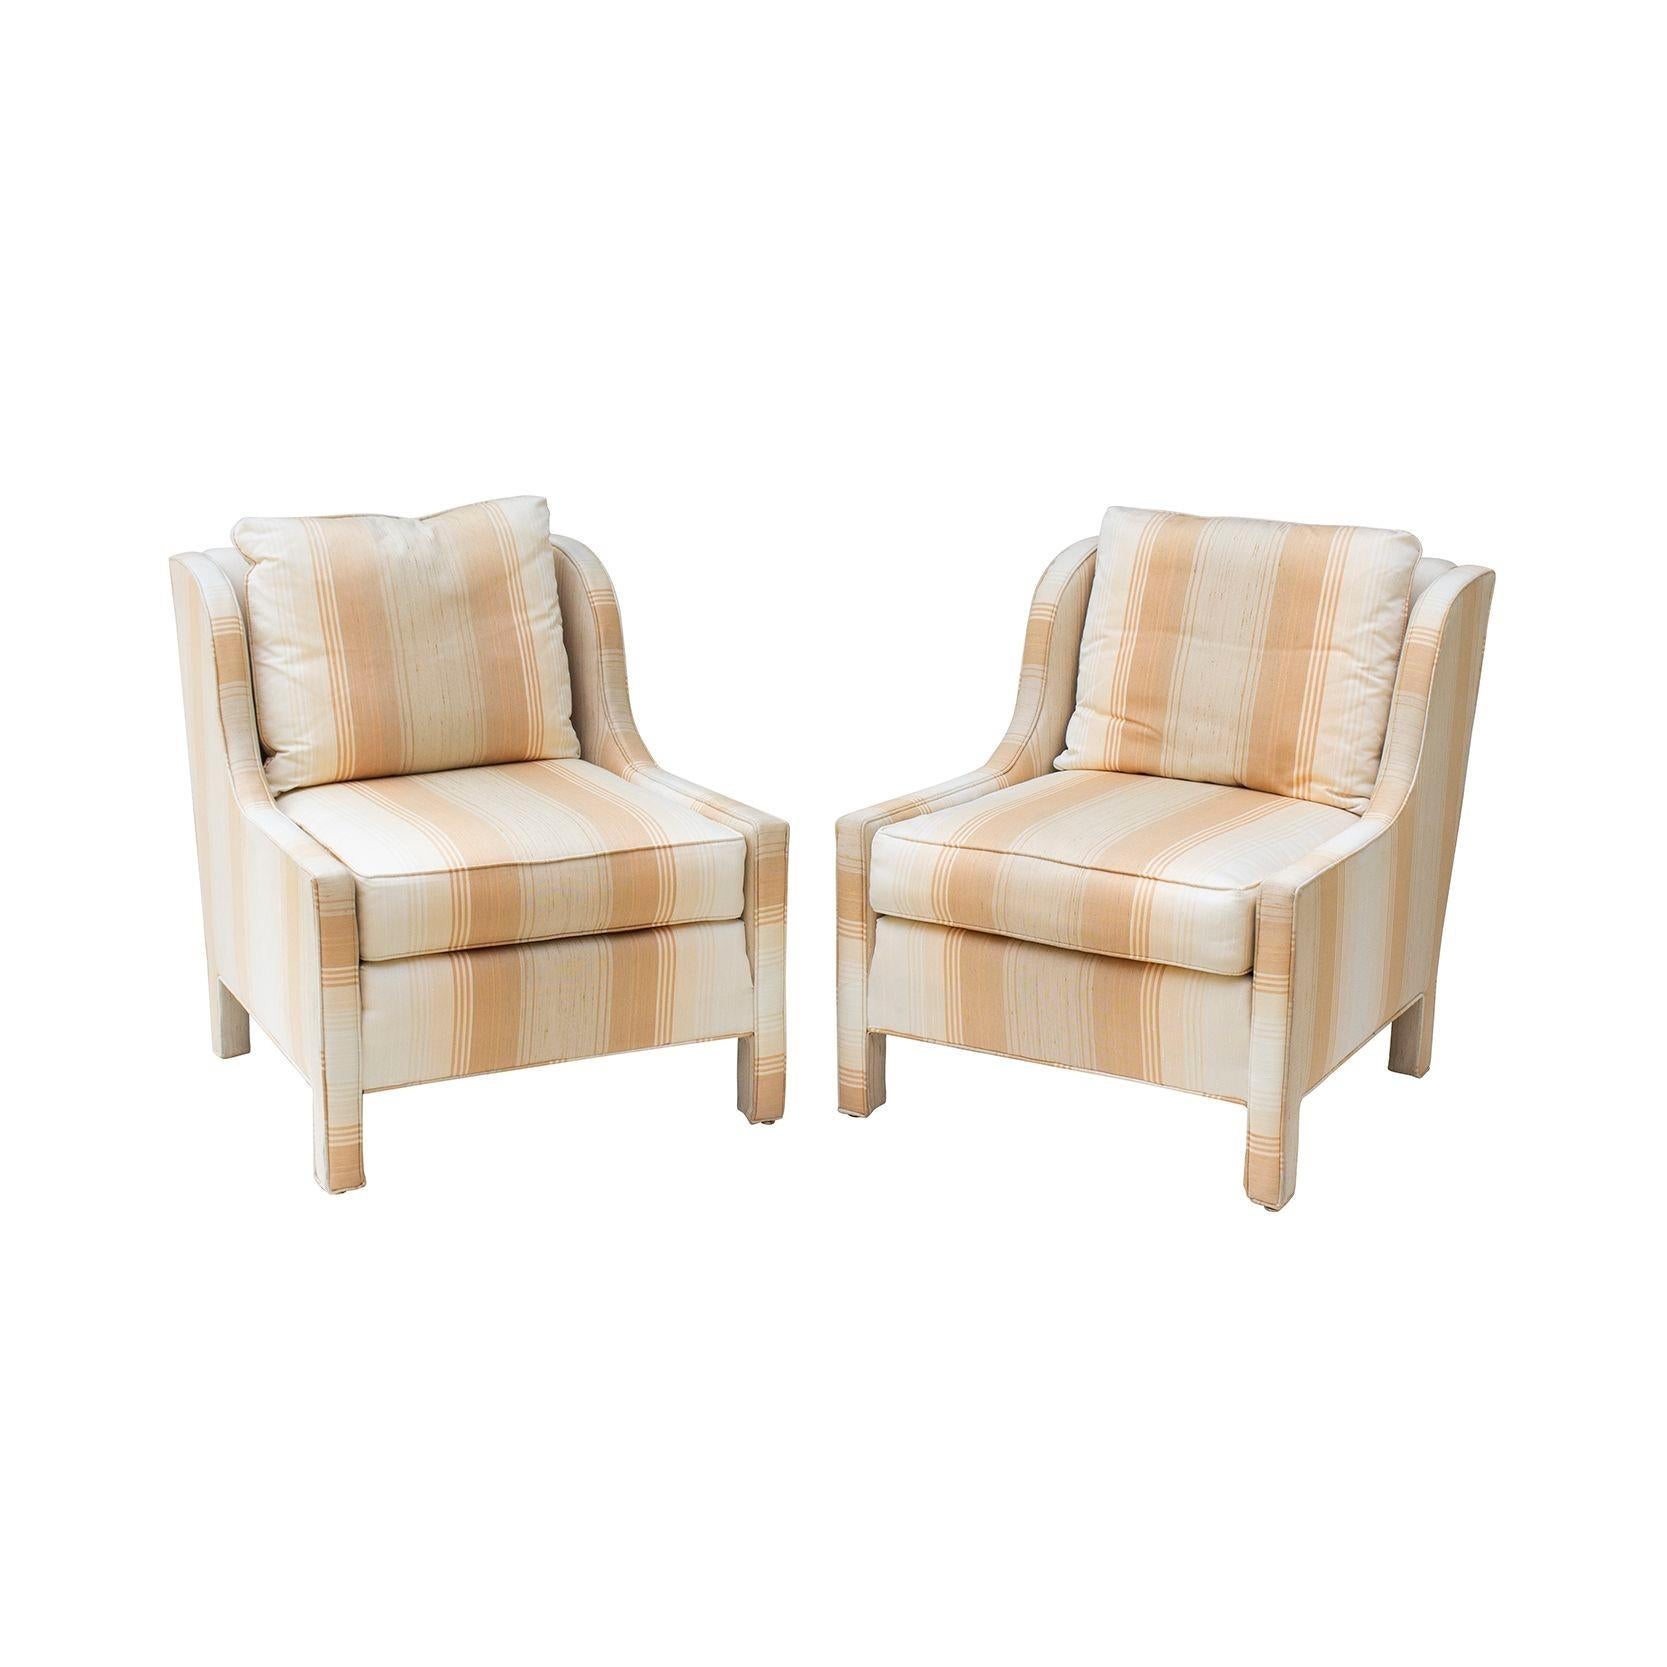 USA, 1980s
Pair of peach striped parsons style slipper chairs with curving arms. The brand is Hickory Tavern by Lane. A nice contemporary blend of a parsons chair and a wing chair. Upholstery is in very good condition as is but the frames are very